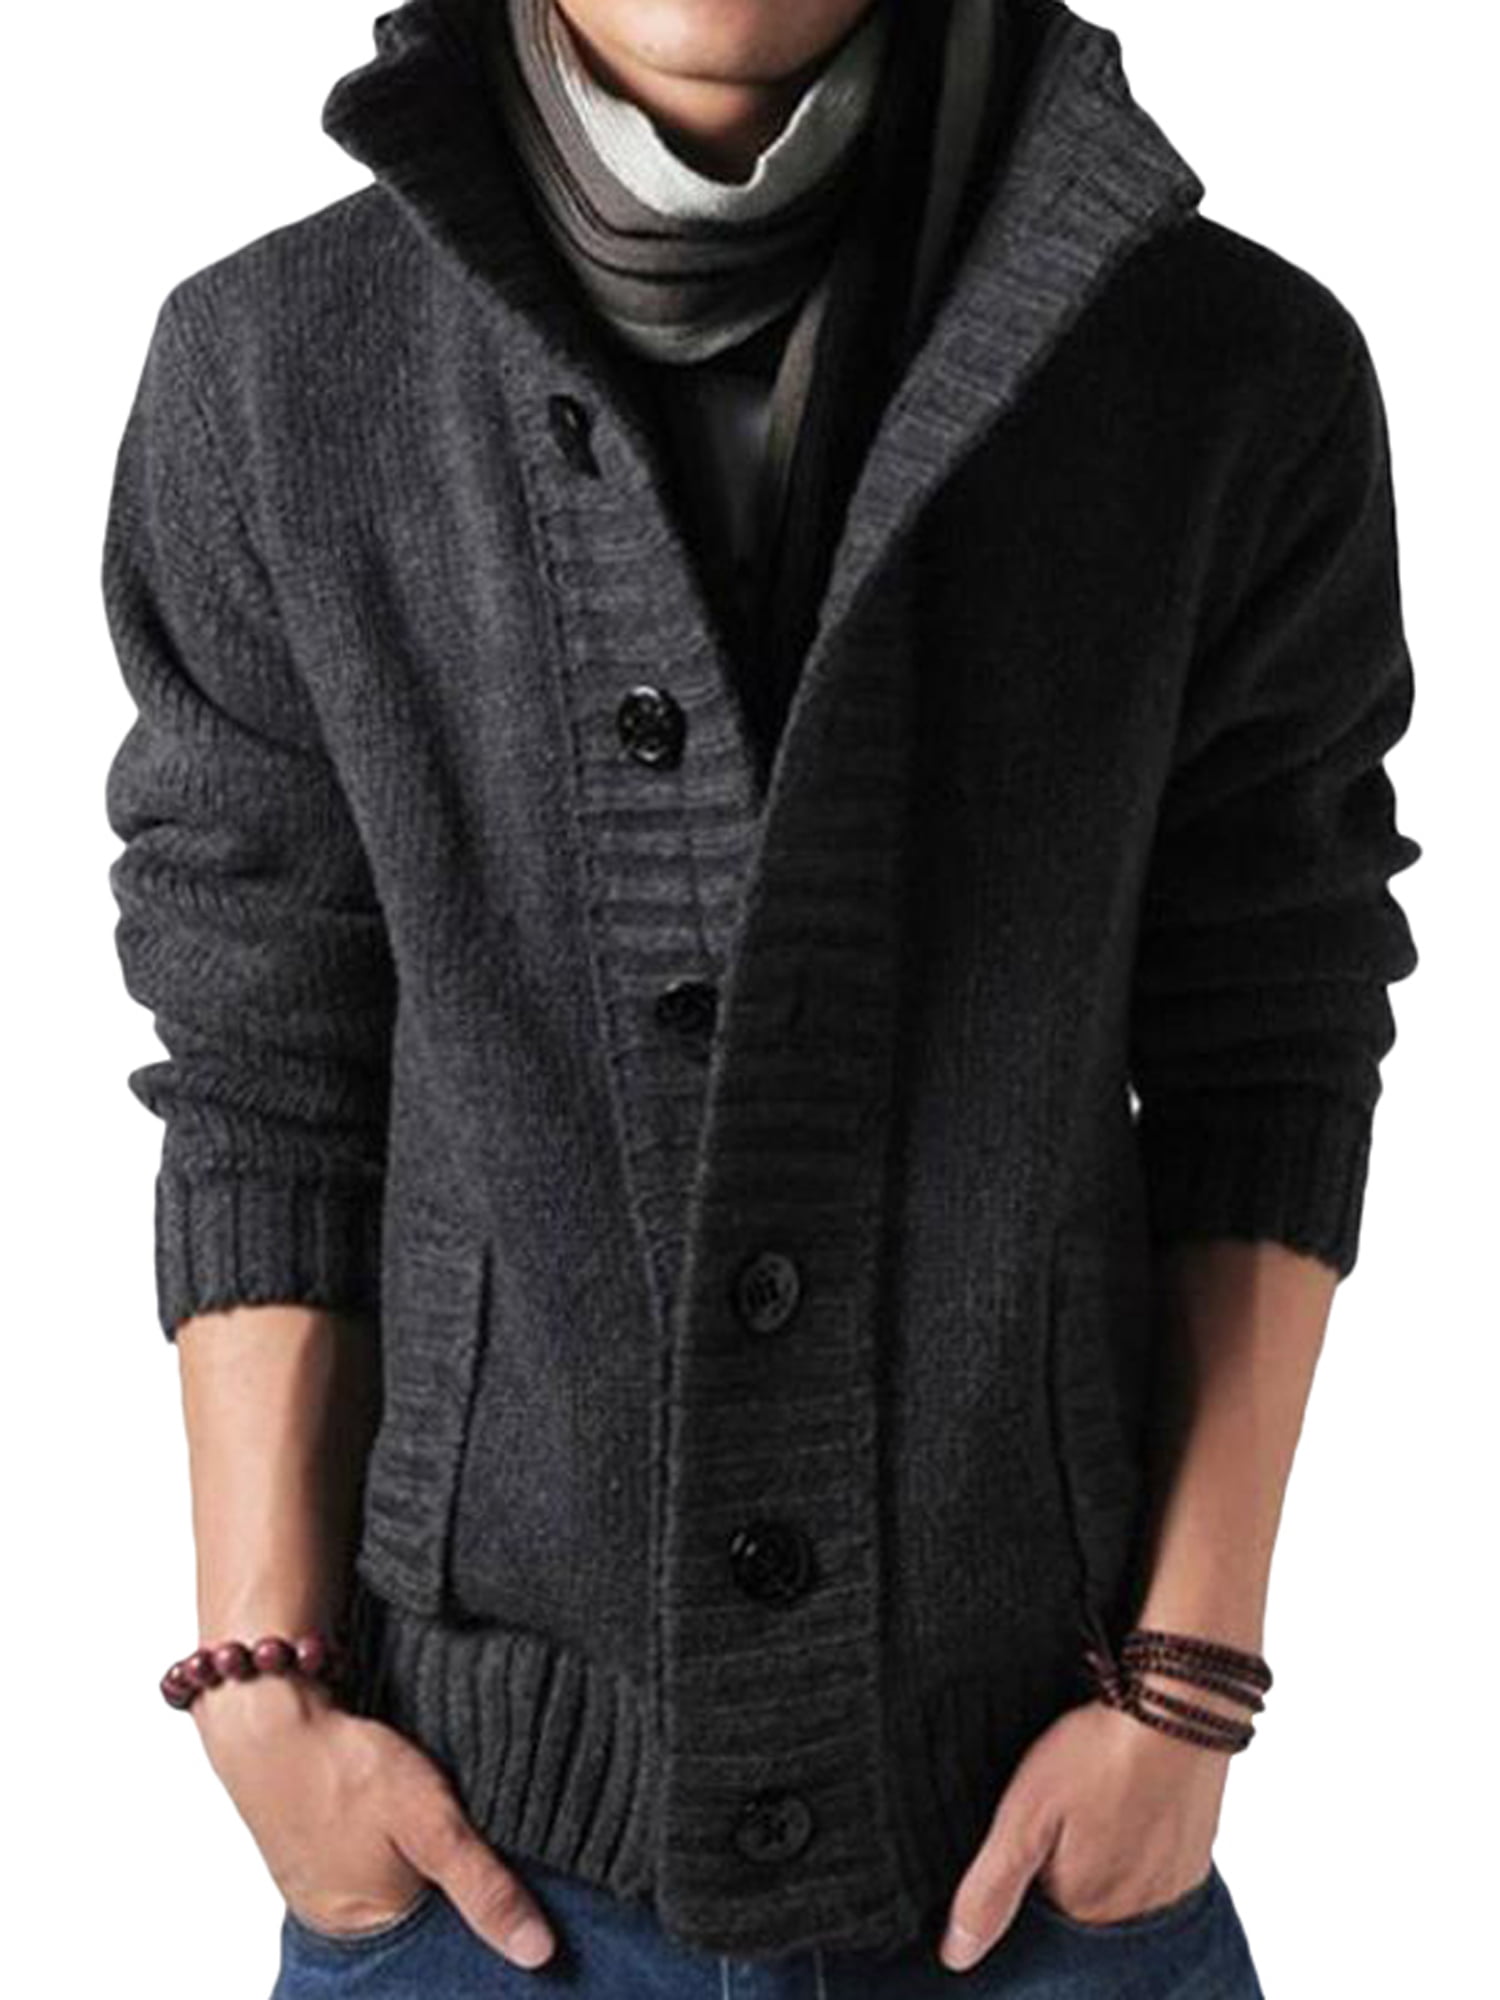 Mens Stand Collar Wool Knitted Thick Sweater Cardigan Warm Buttons Casual Coats